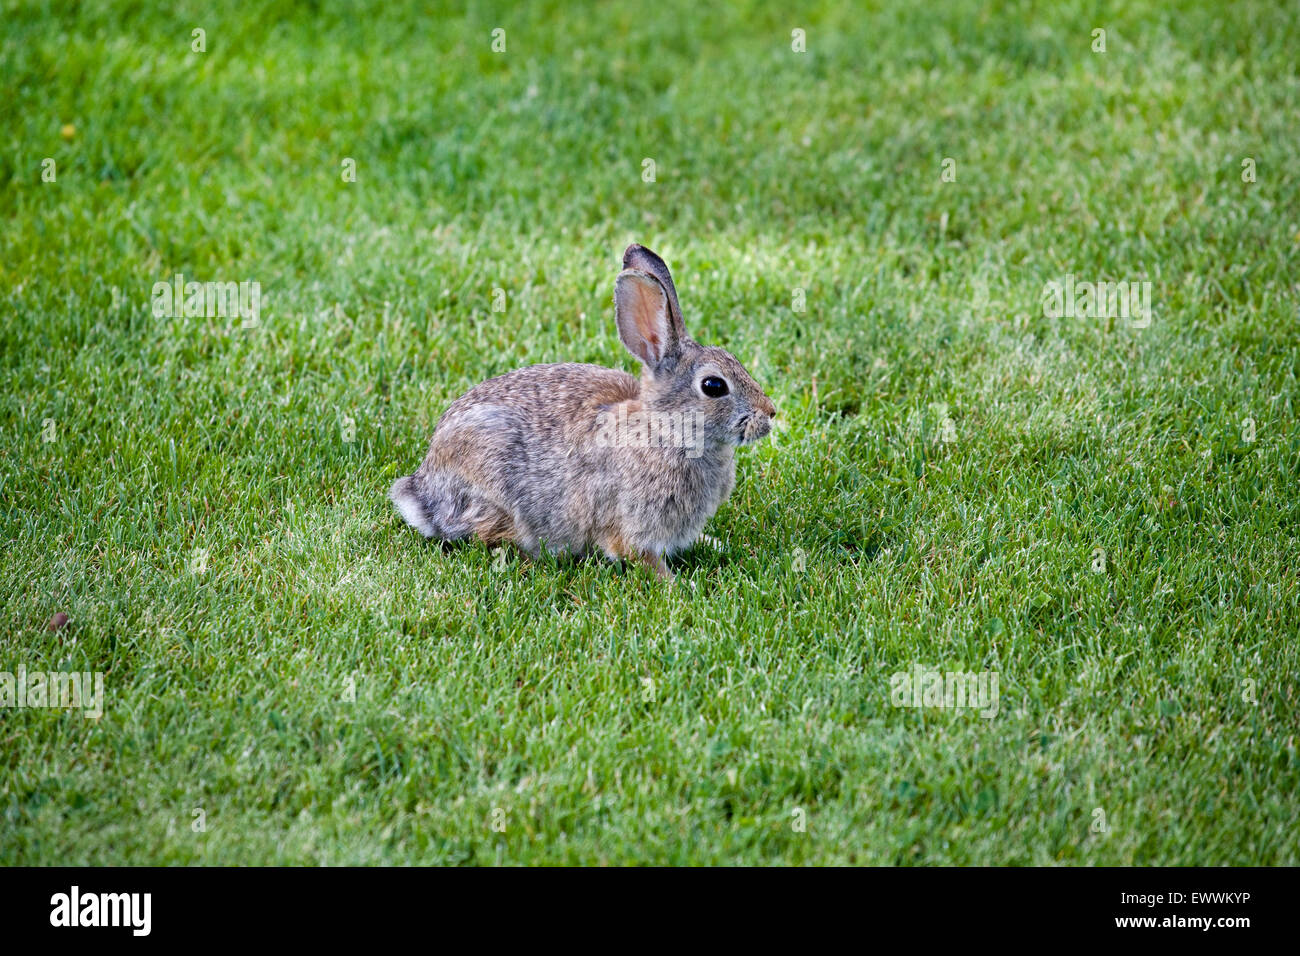 A cottontail rabbit on a grassy yard Stock Photo